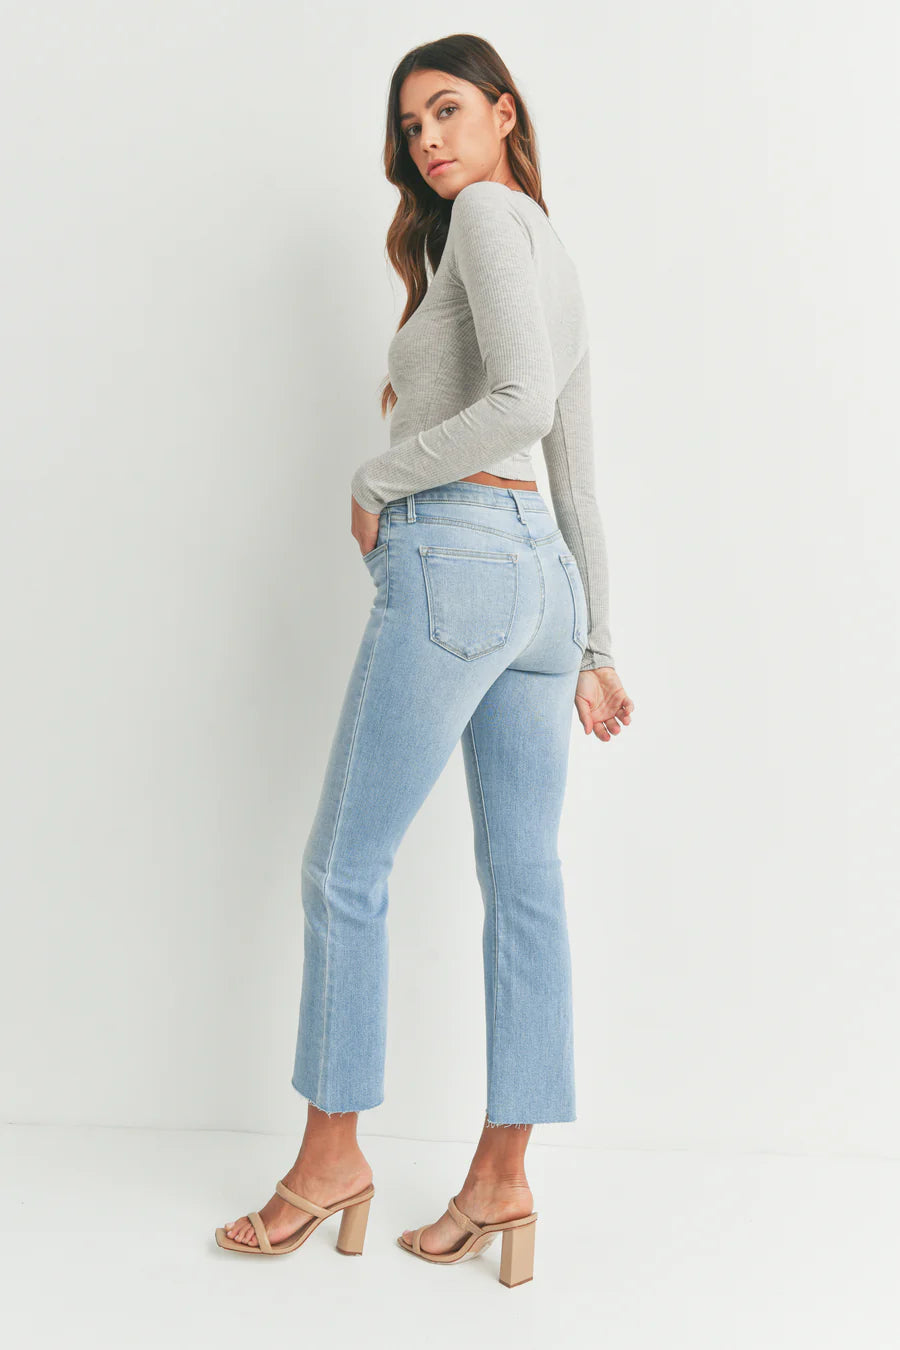 MOTHER Denim Jeans: The Ultimate Buying Guide For Women - The Mom Edit